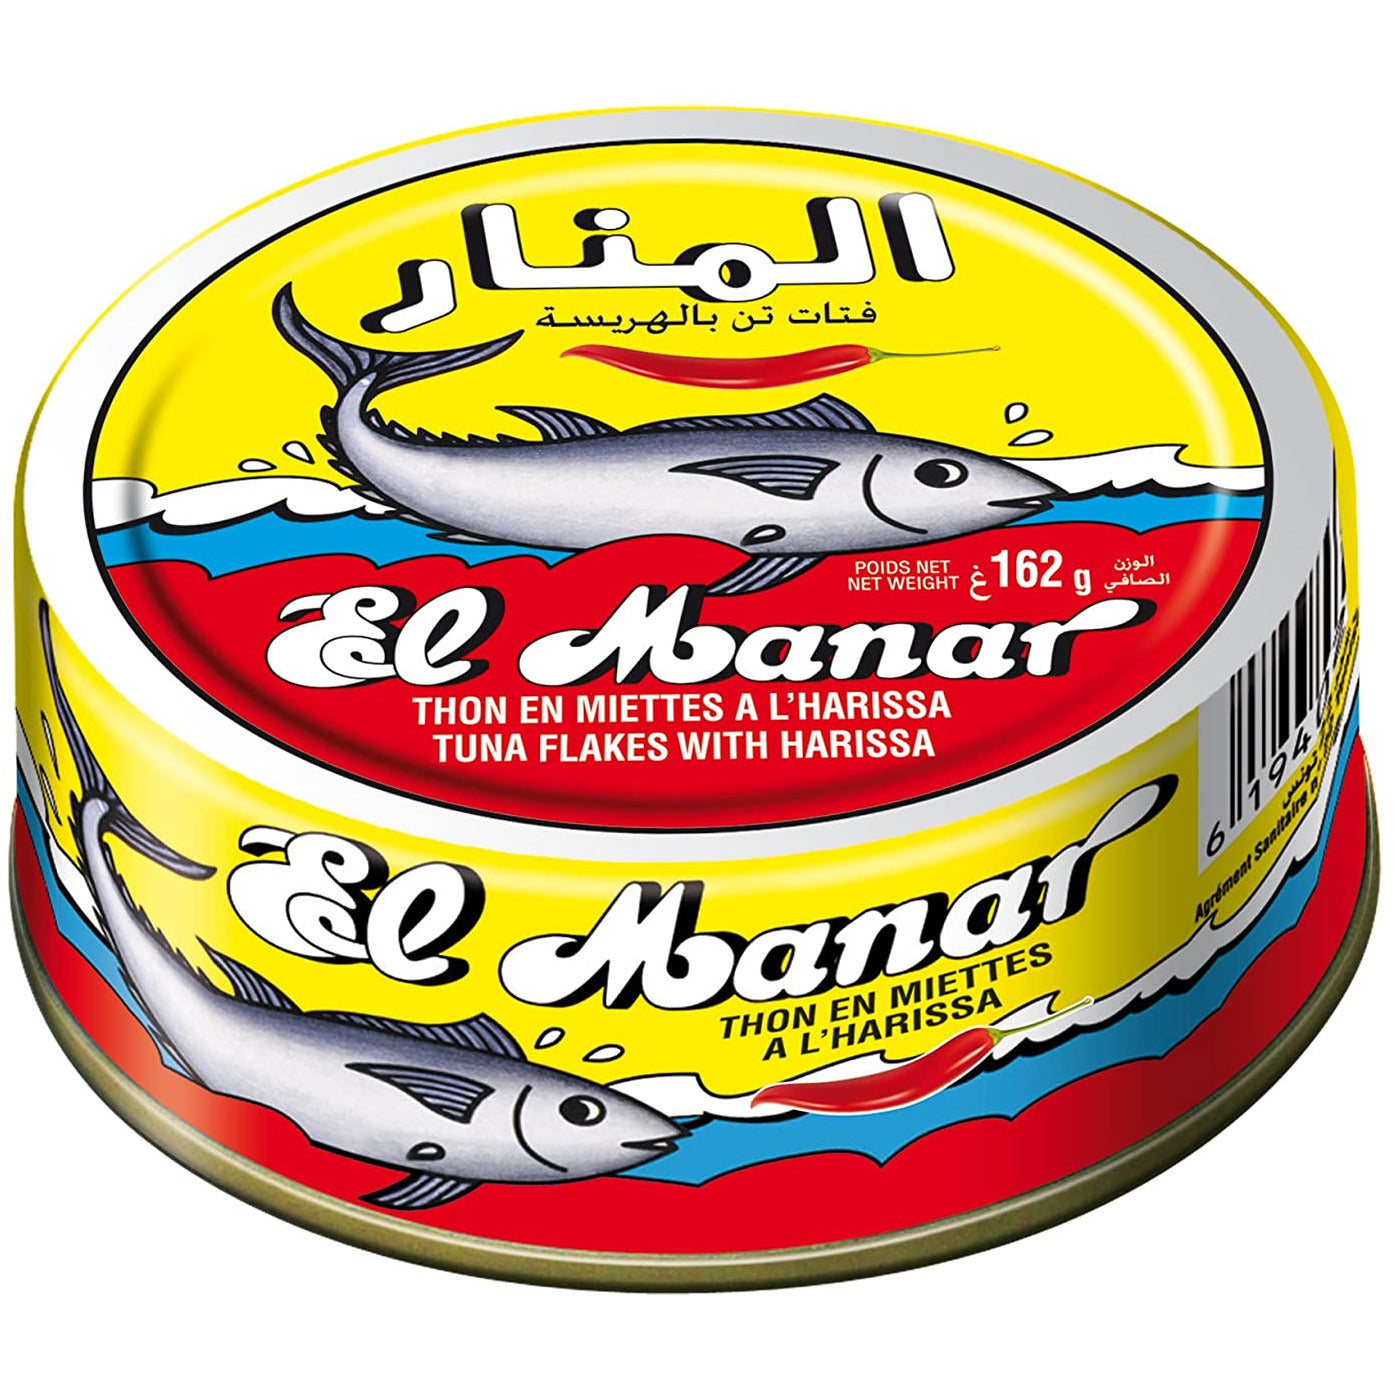 Light Tuna Flakes with Harissa - Canned Spicy Tuna Fish in Harissa Oil, from El Manar - 10-Pack of 160g Cans